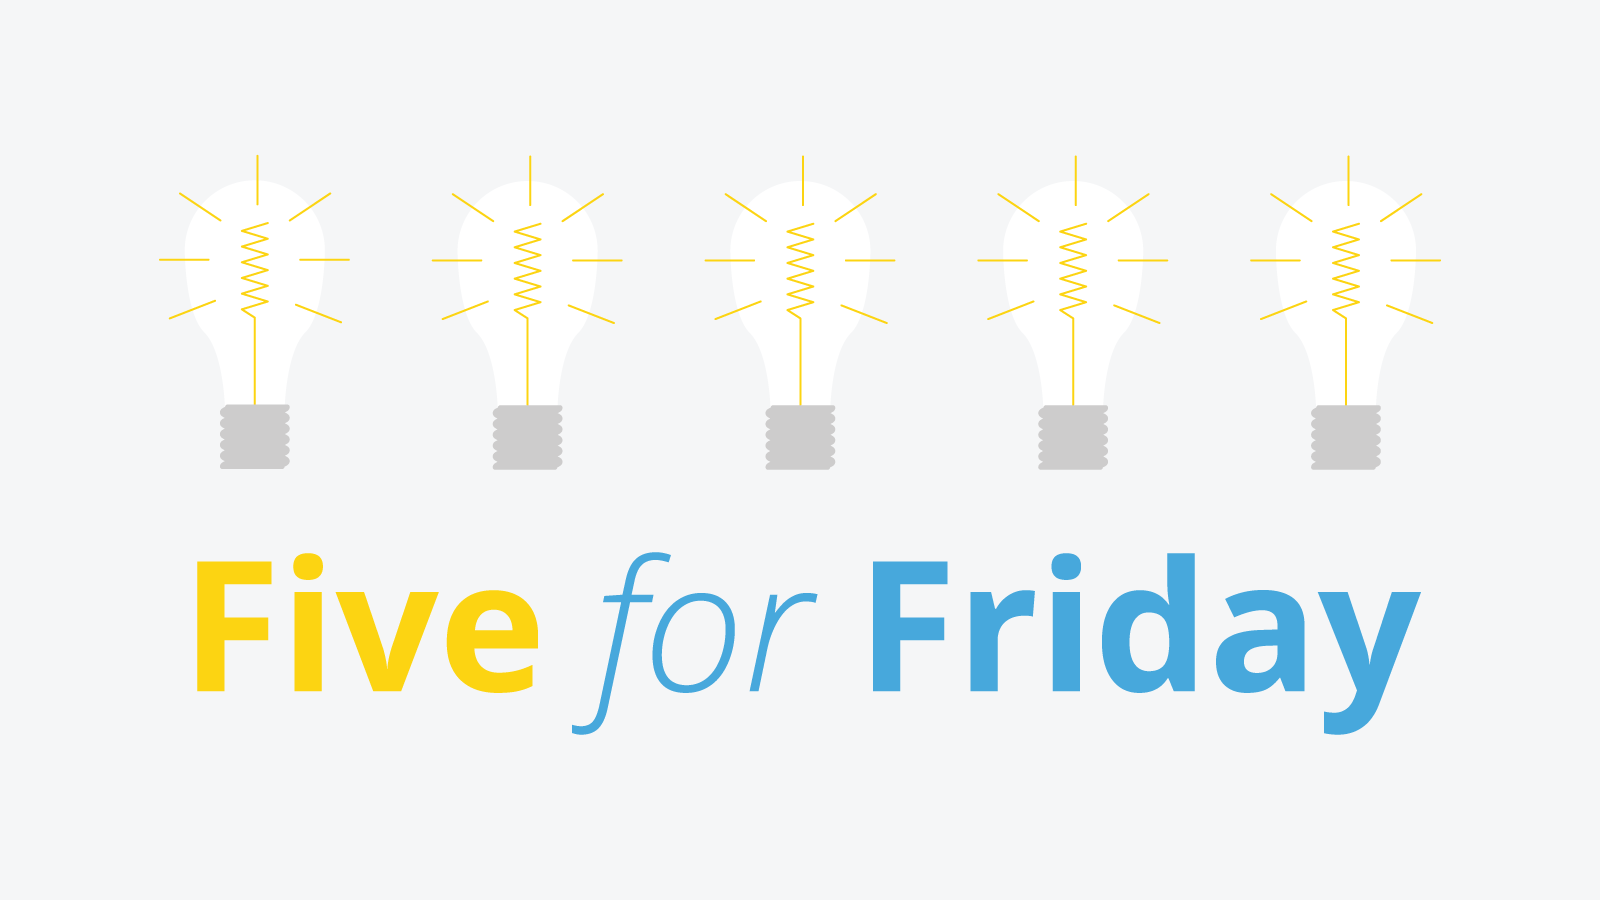 Five for Friday: Intranet innovations